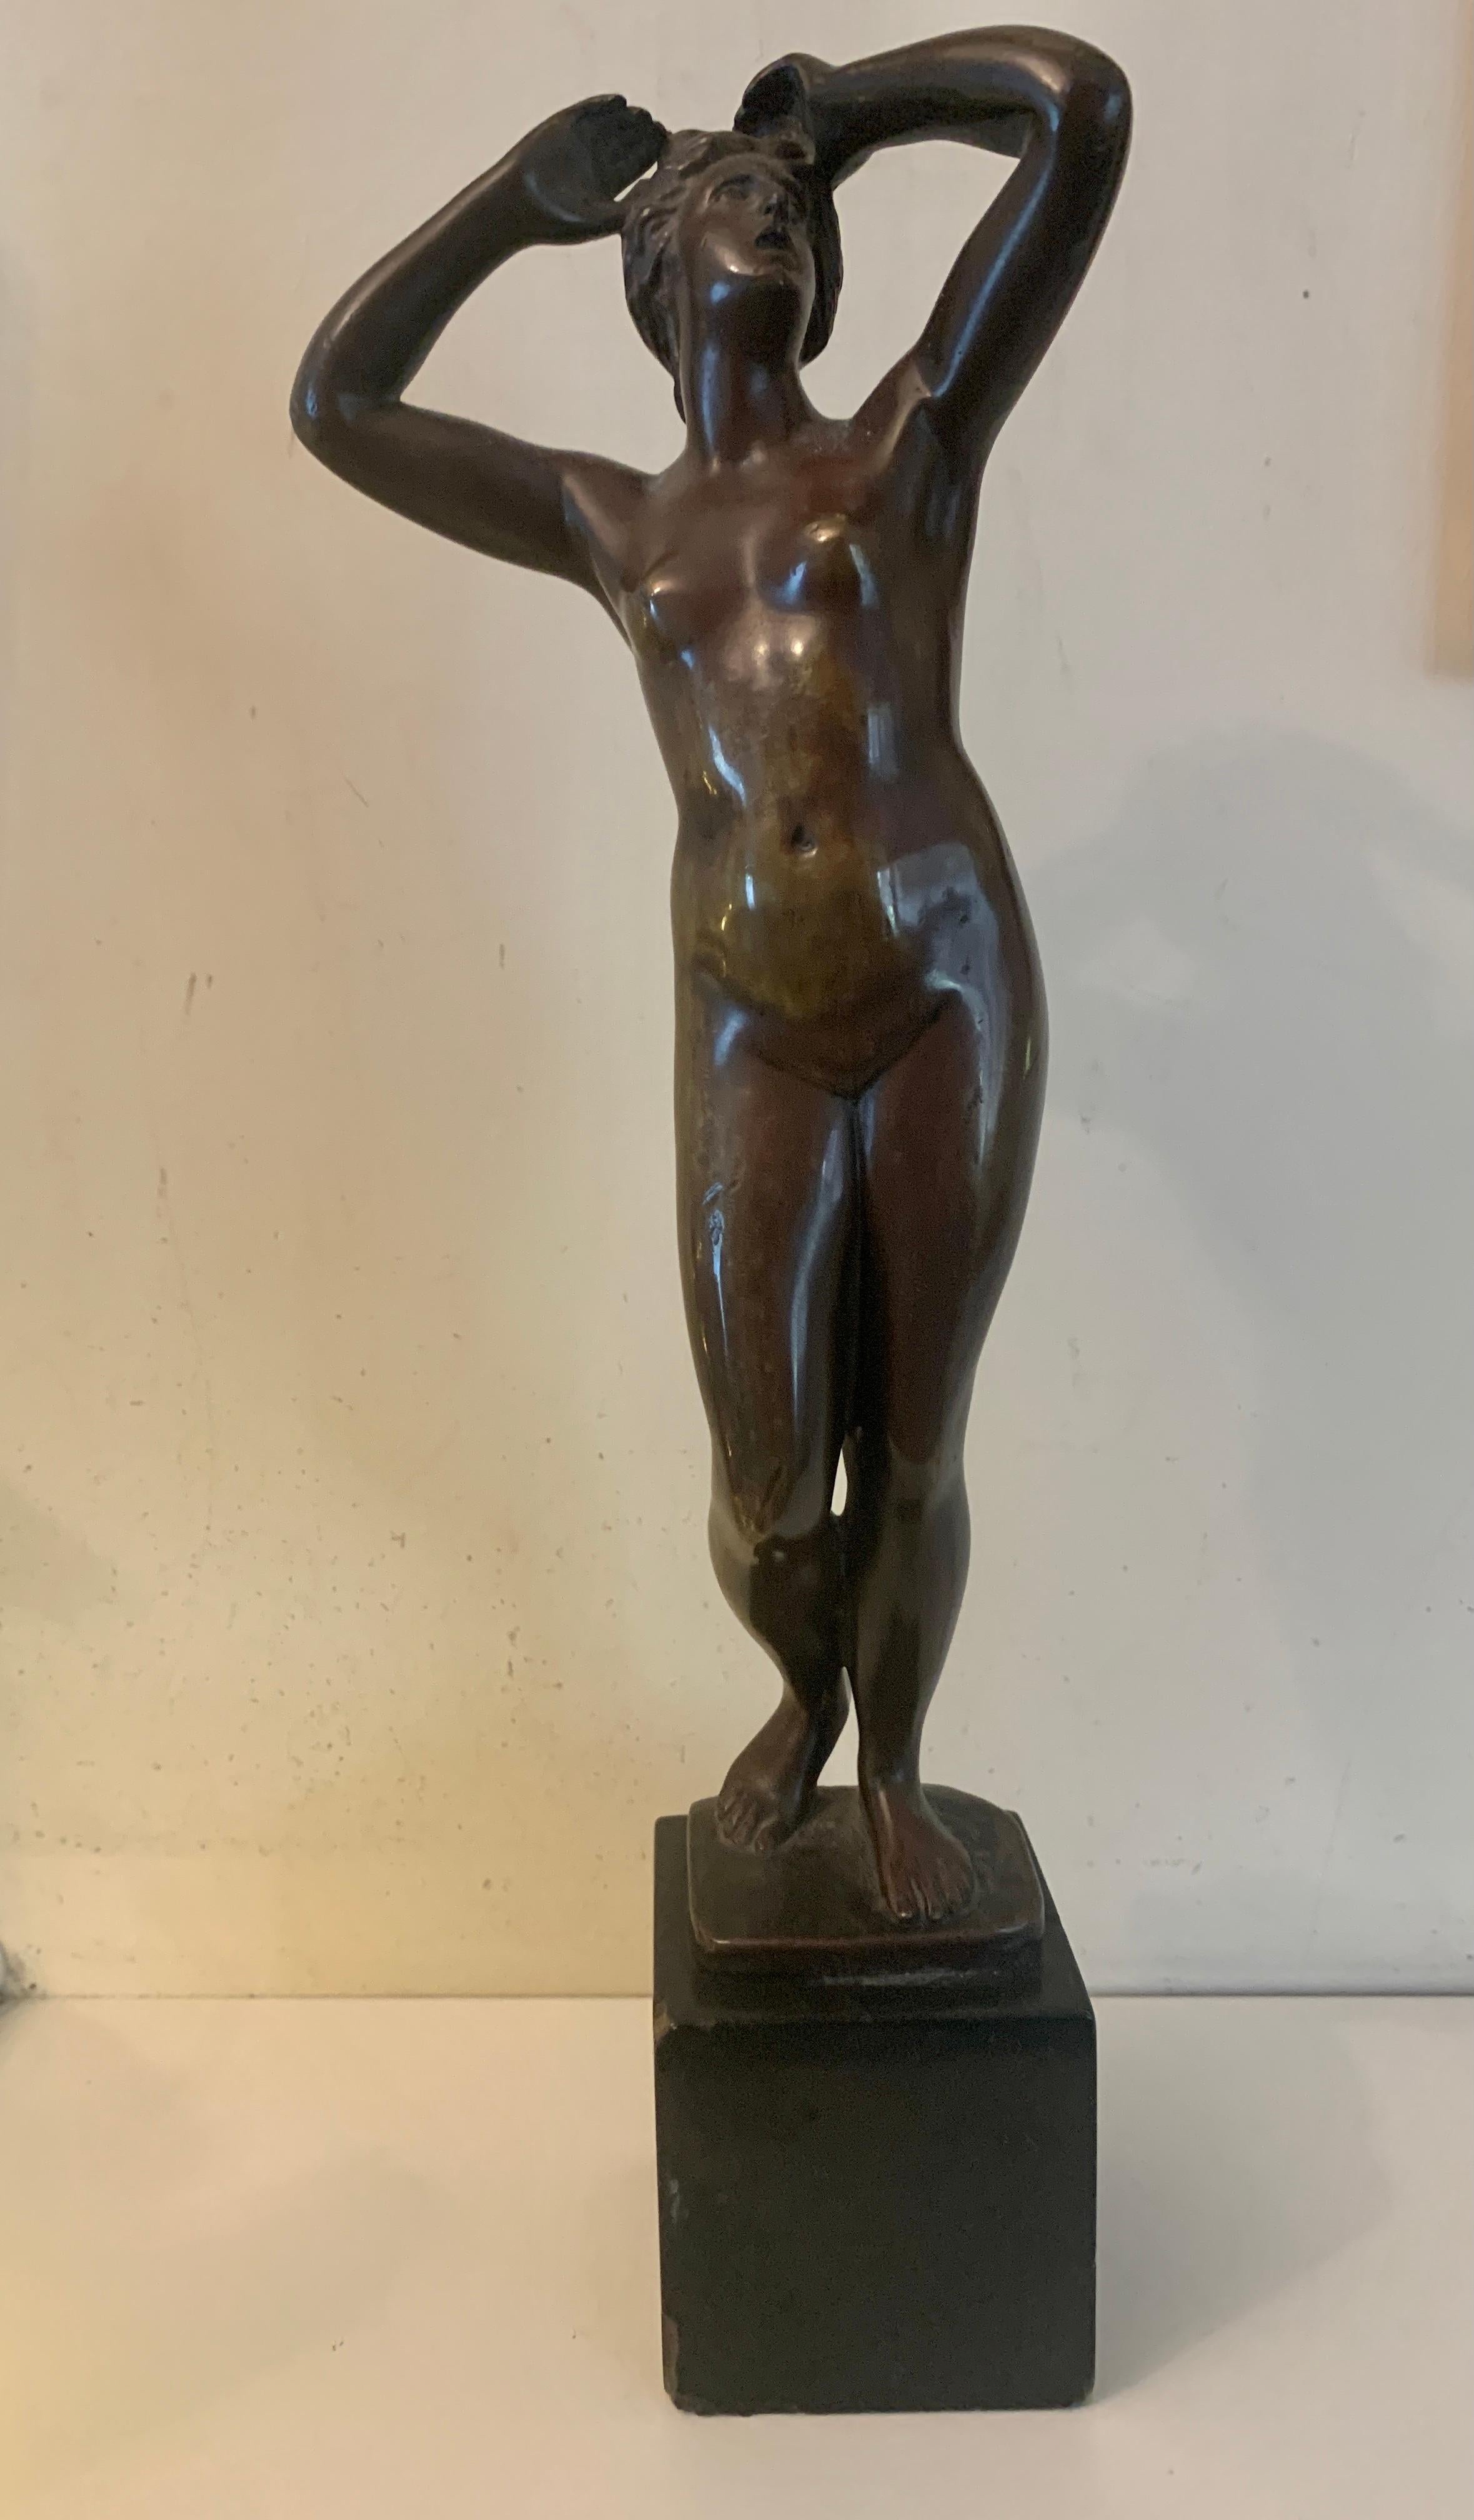 Cartinet Figurative Sculpture - 19th century French Bronze of a naked woman standing up.